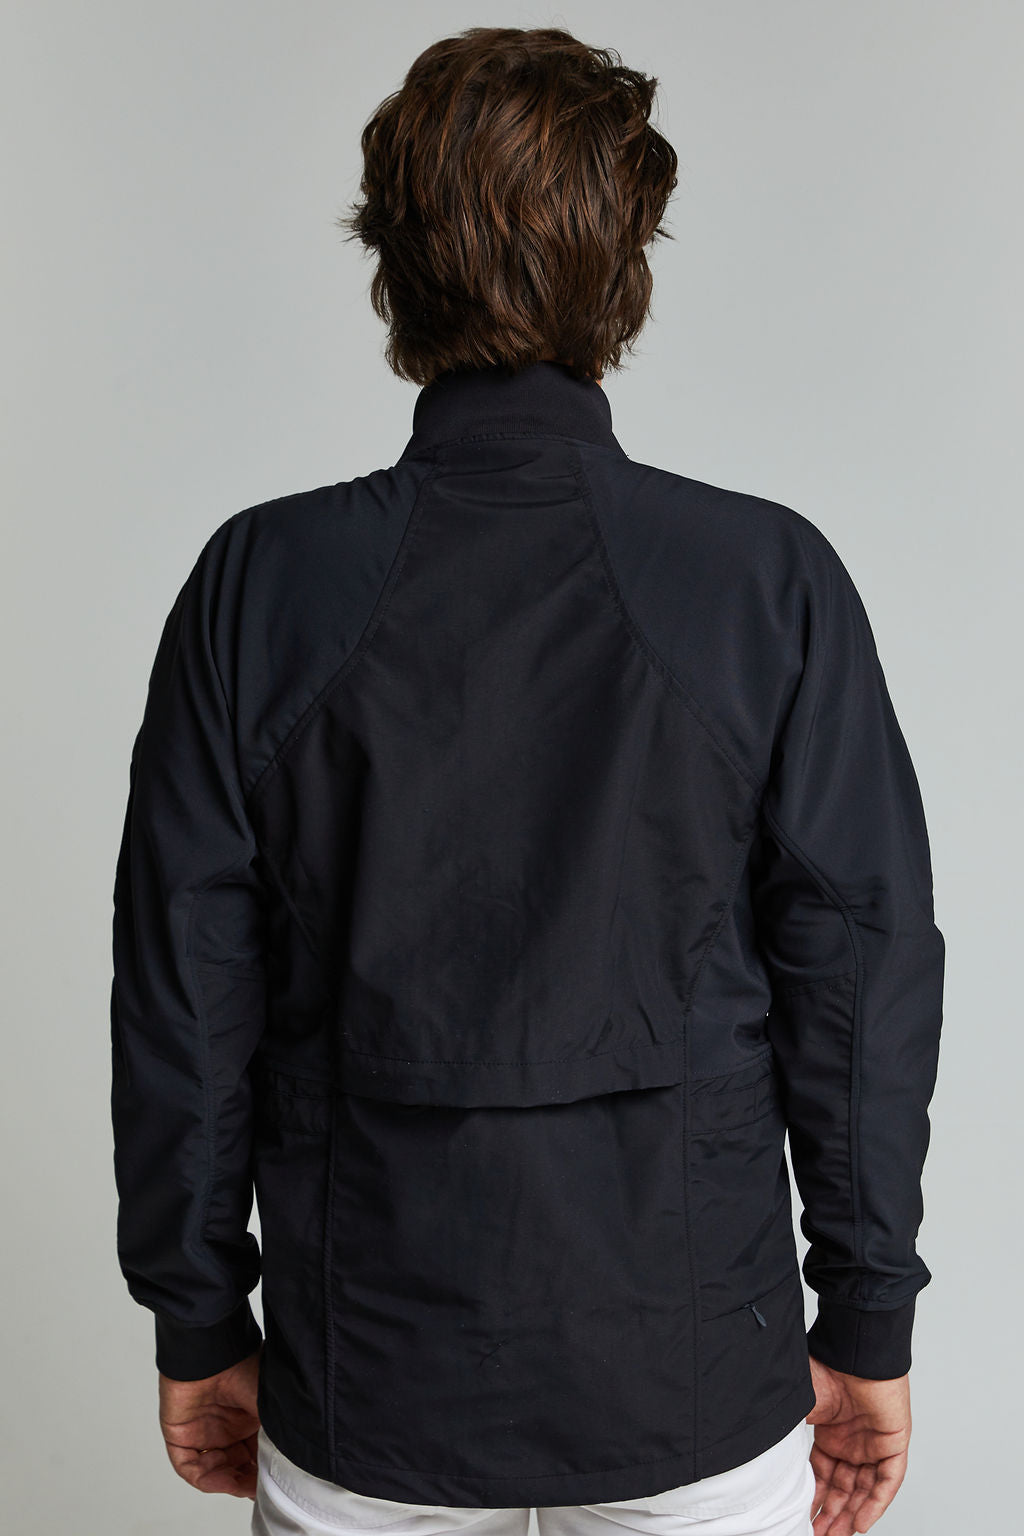 Technical Golf Jacket Men. Recycled bluesign approved